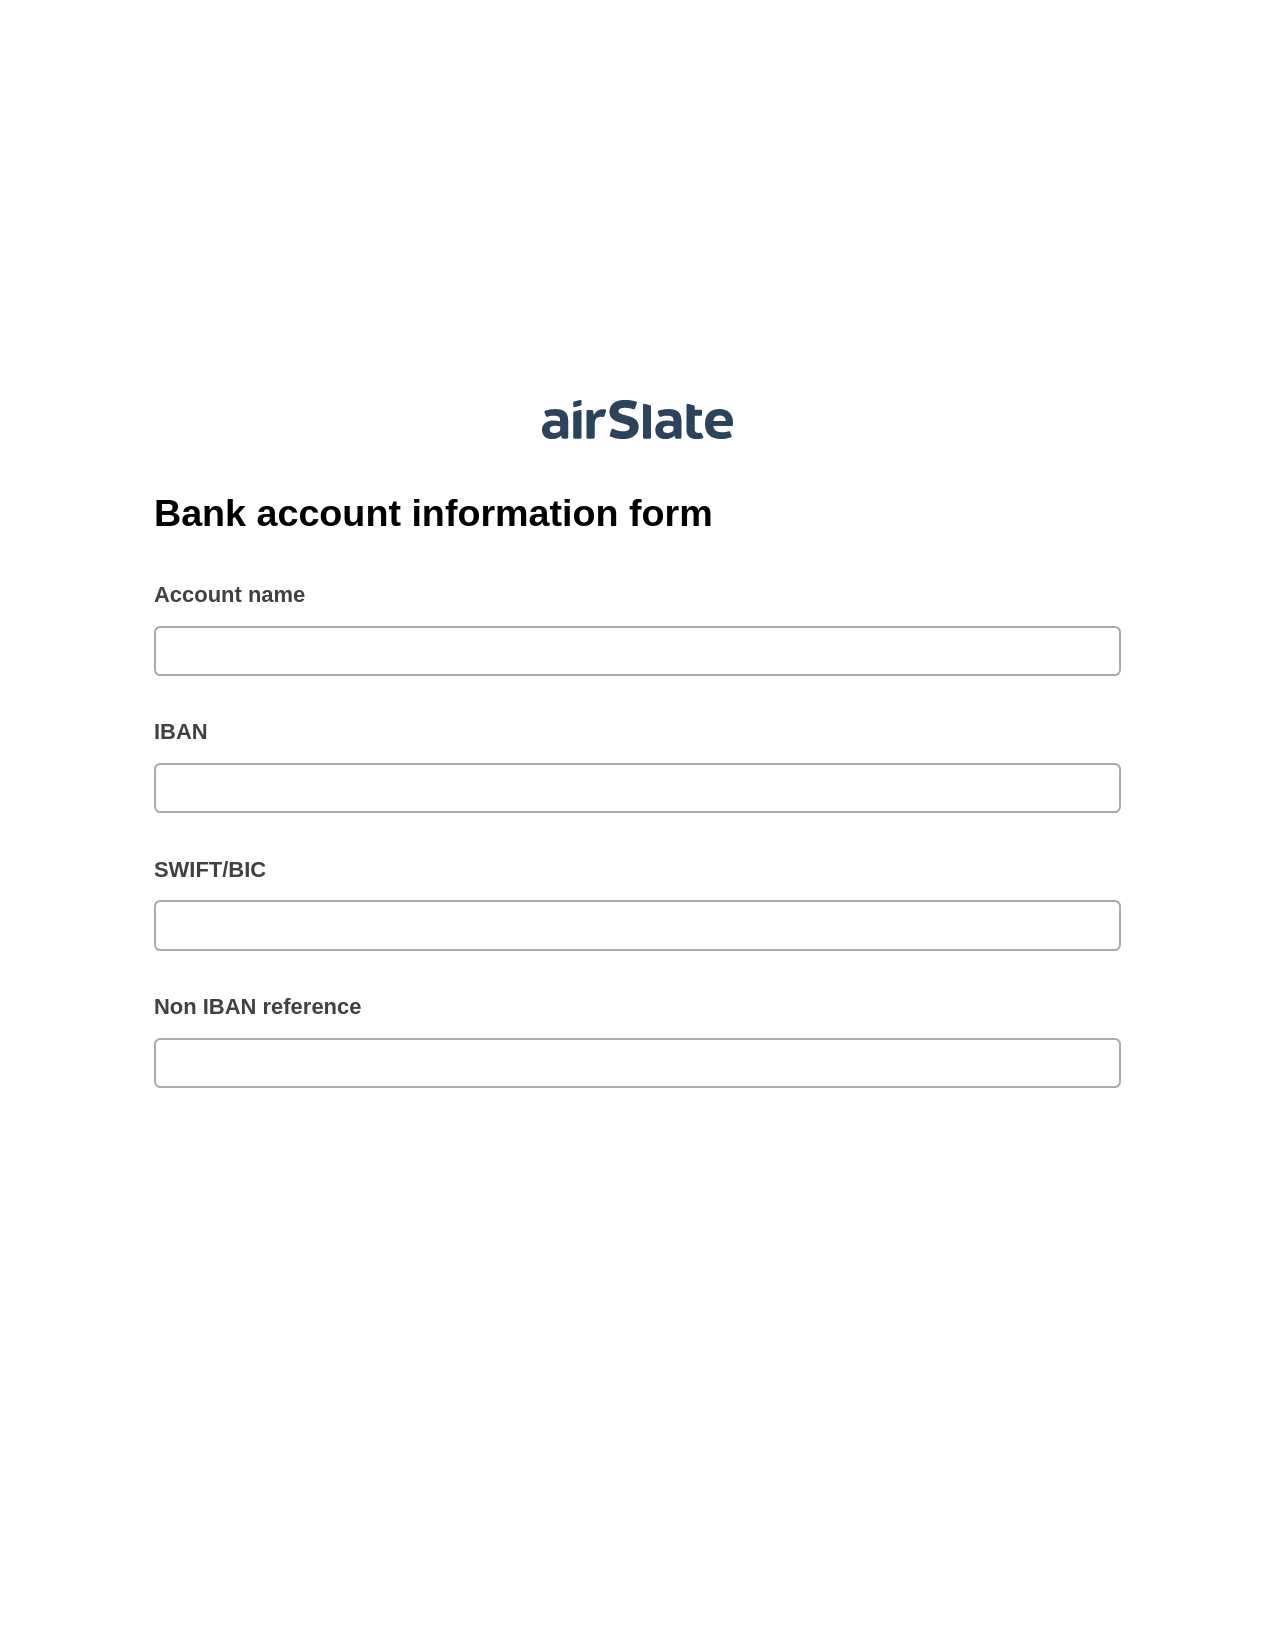 Bank account information form Pre-fill from MySQL Dropdown Options Bot, Export to MS Dynamics 365 Bot, Post-finish Document Bot